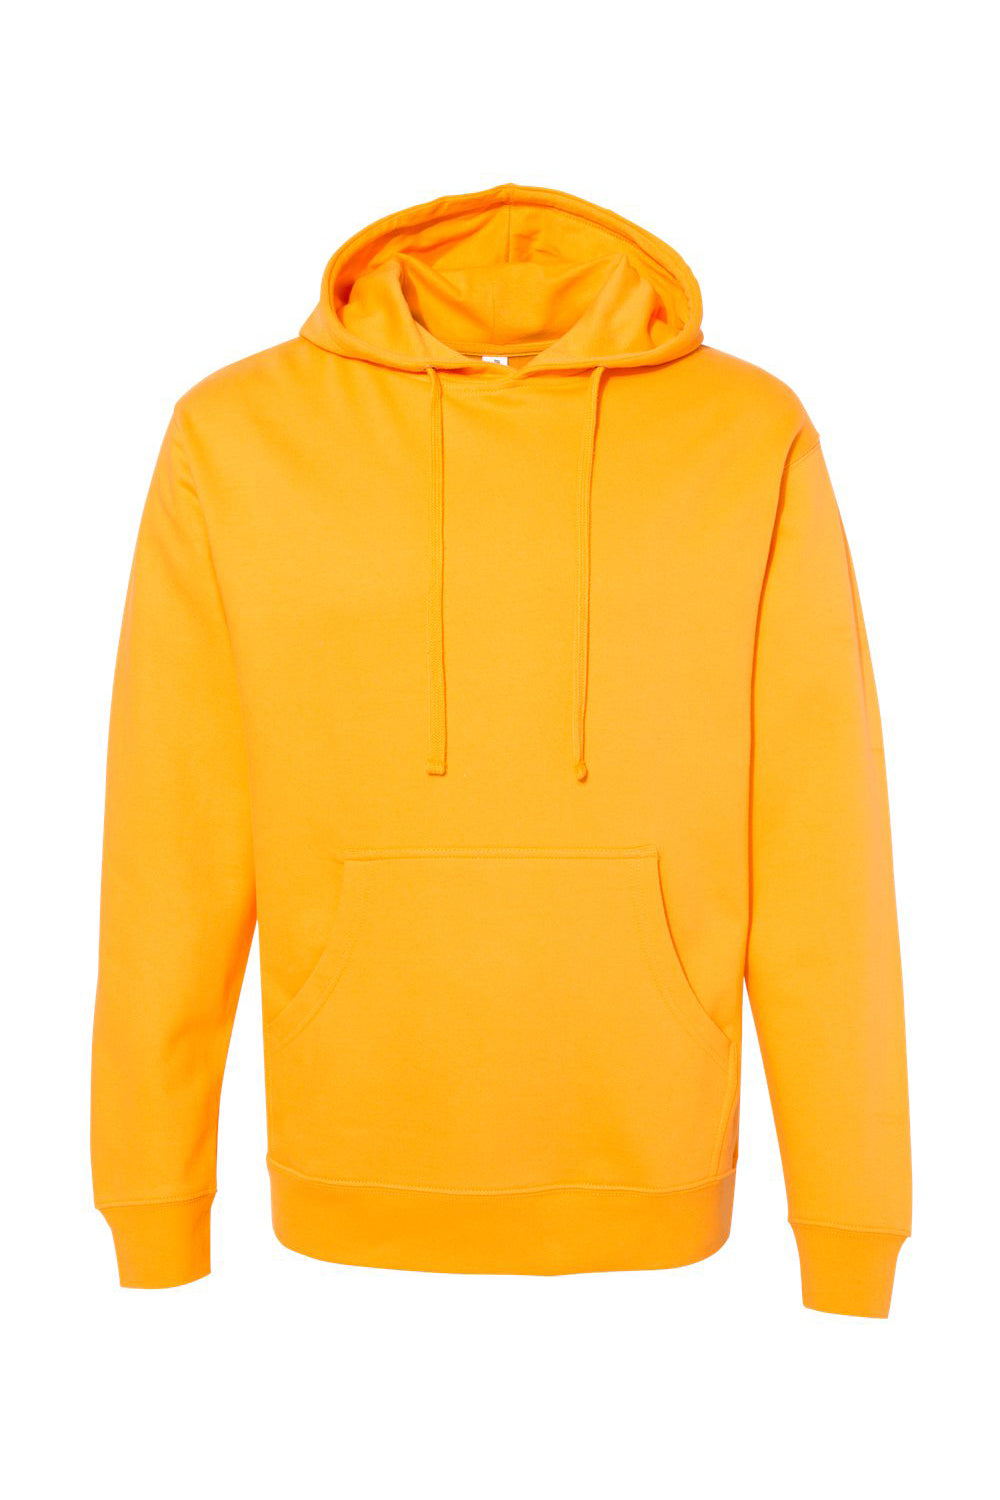 Independent Trading Co. SS4500 Mens Hooded Sweatshirt Hoodie Gold Flat Front